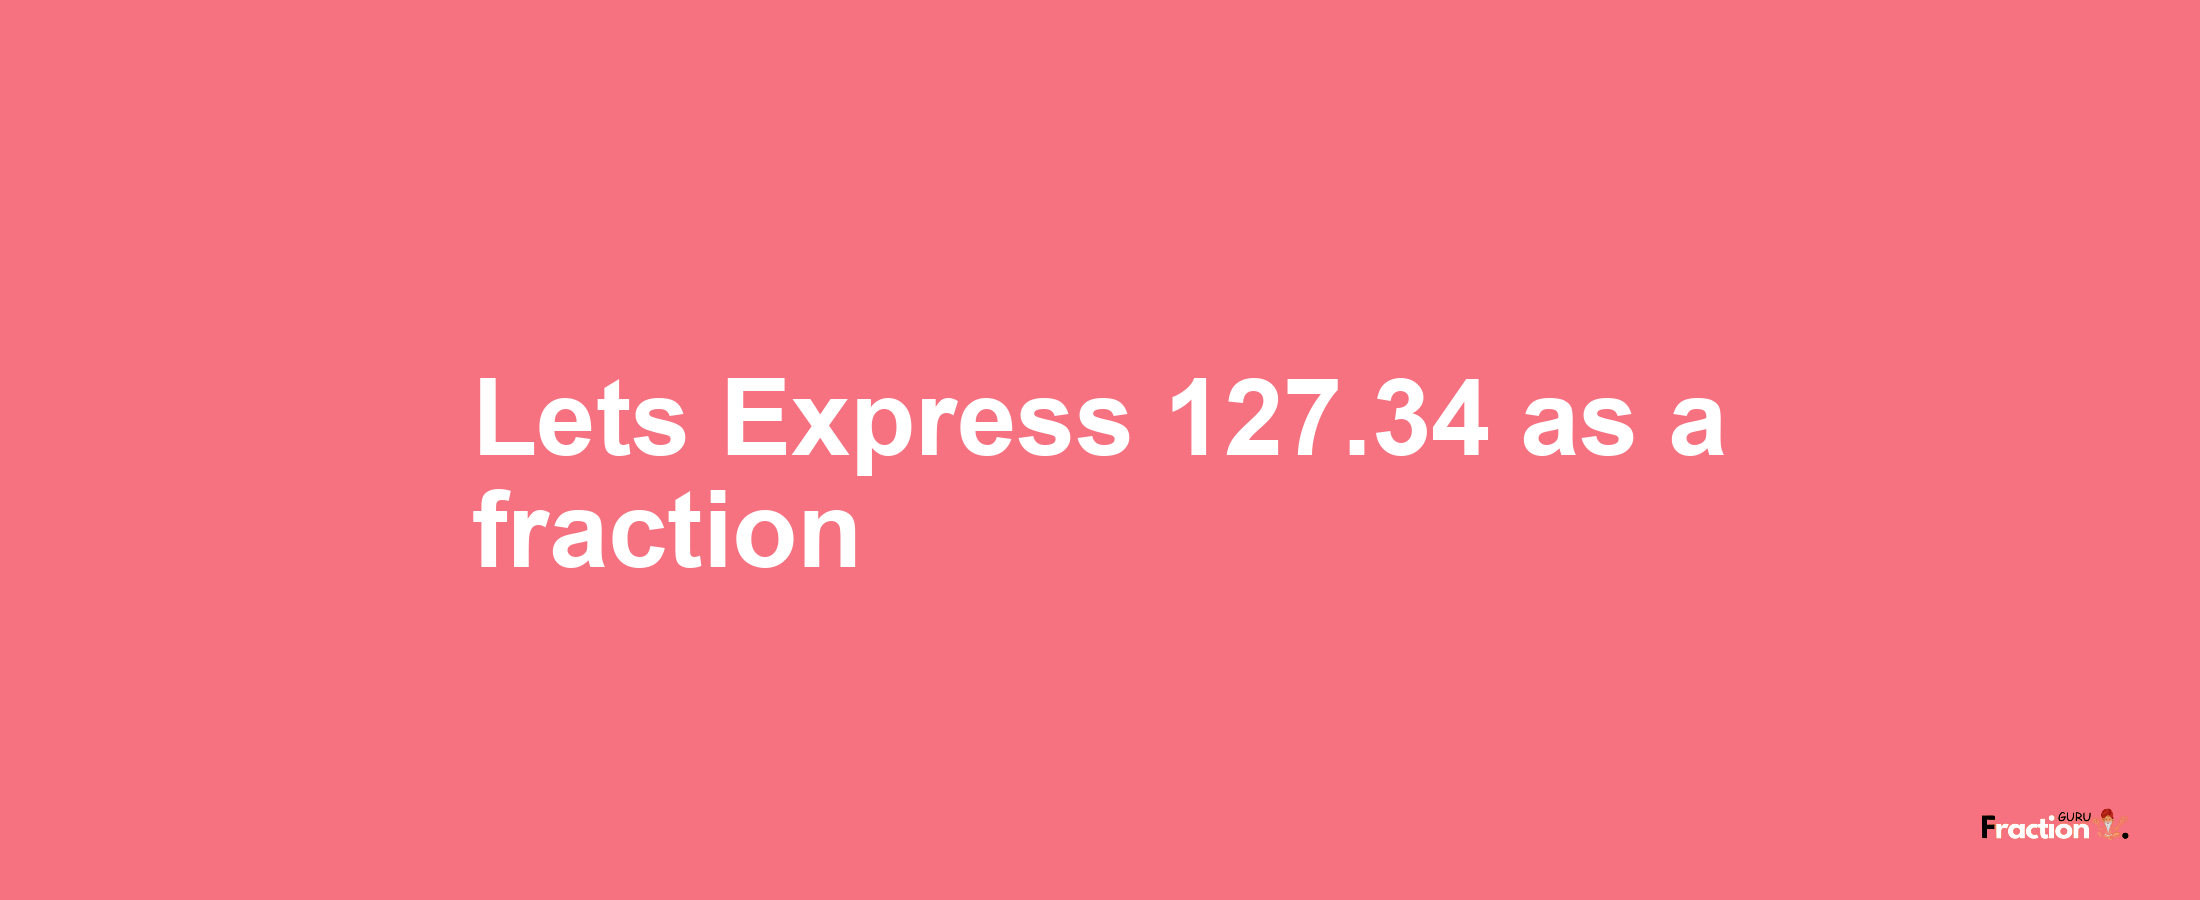 Lets Express 127.34 as afraction